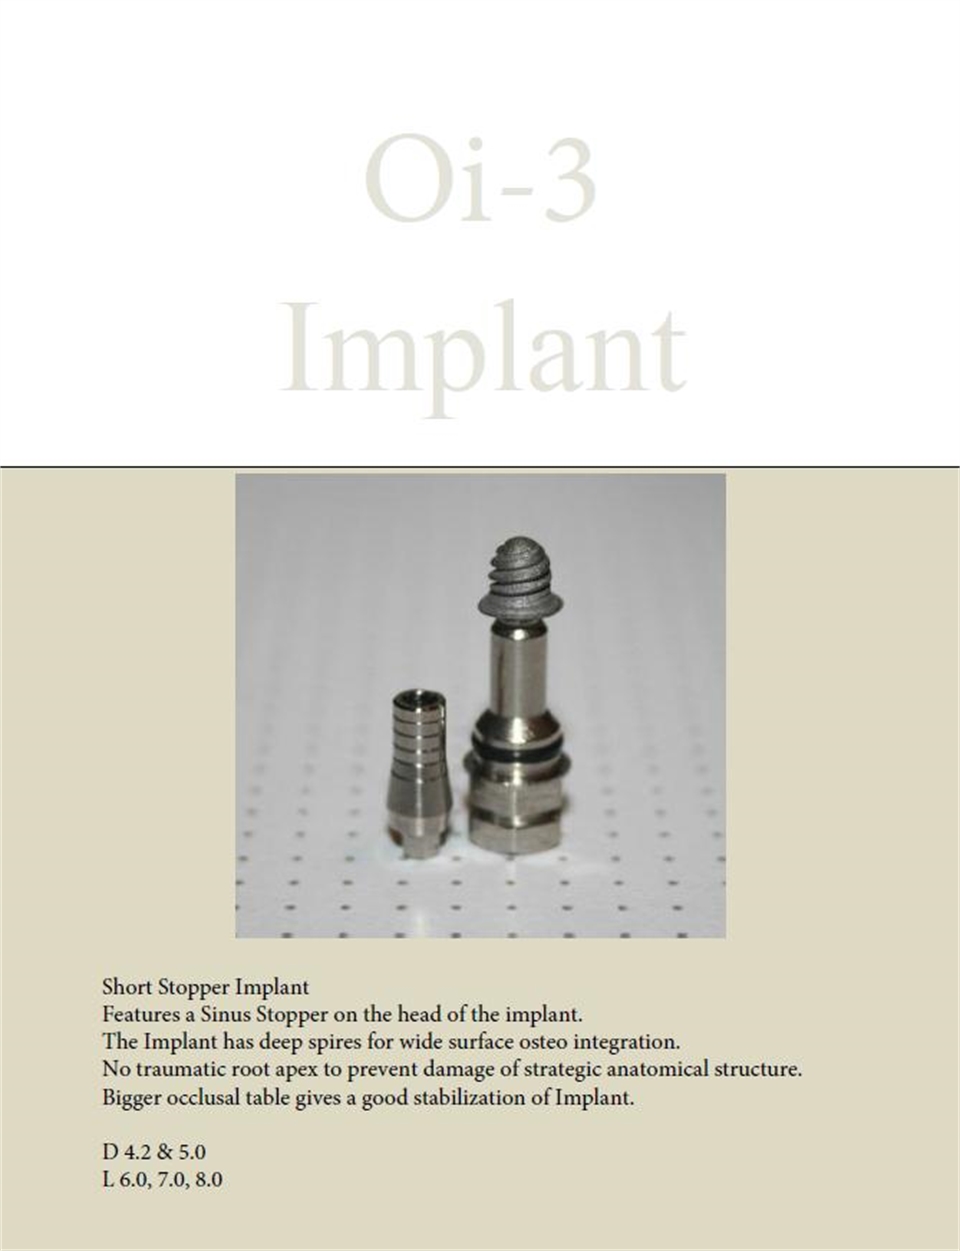 Short Stopper Implant features a Sinus Stopper on the head of the implant. 